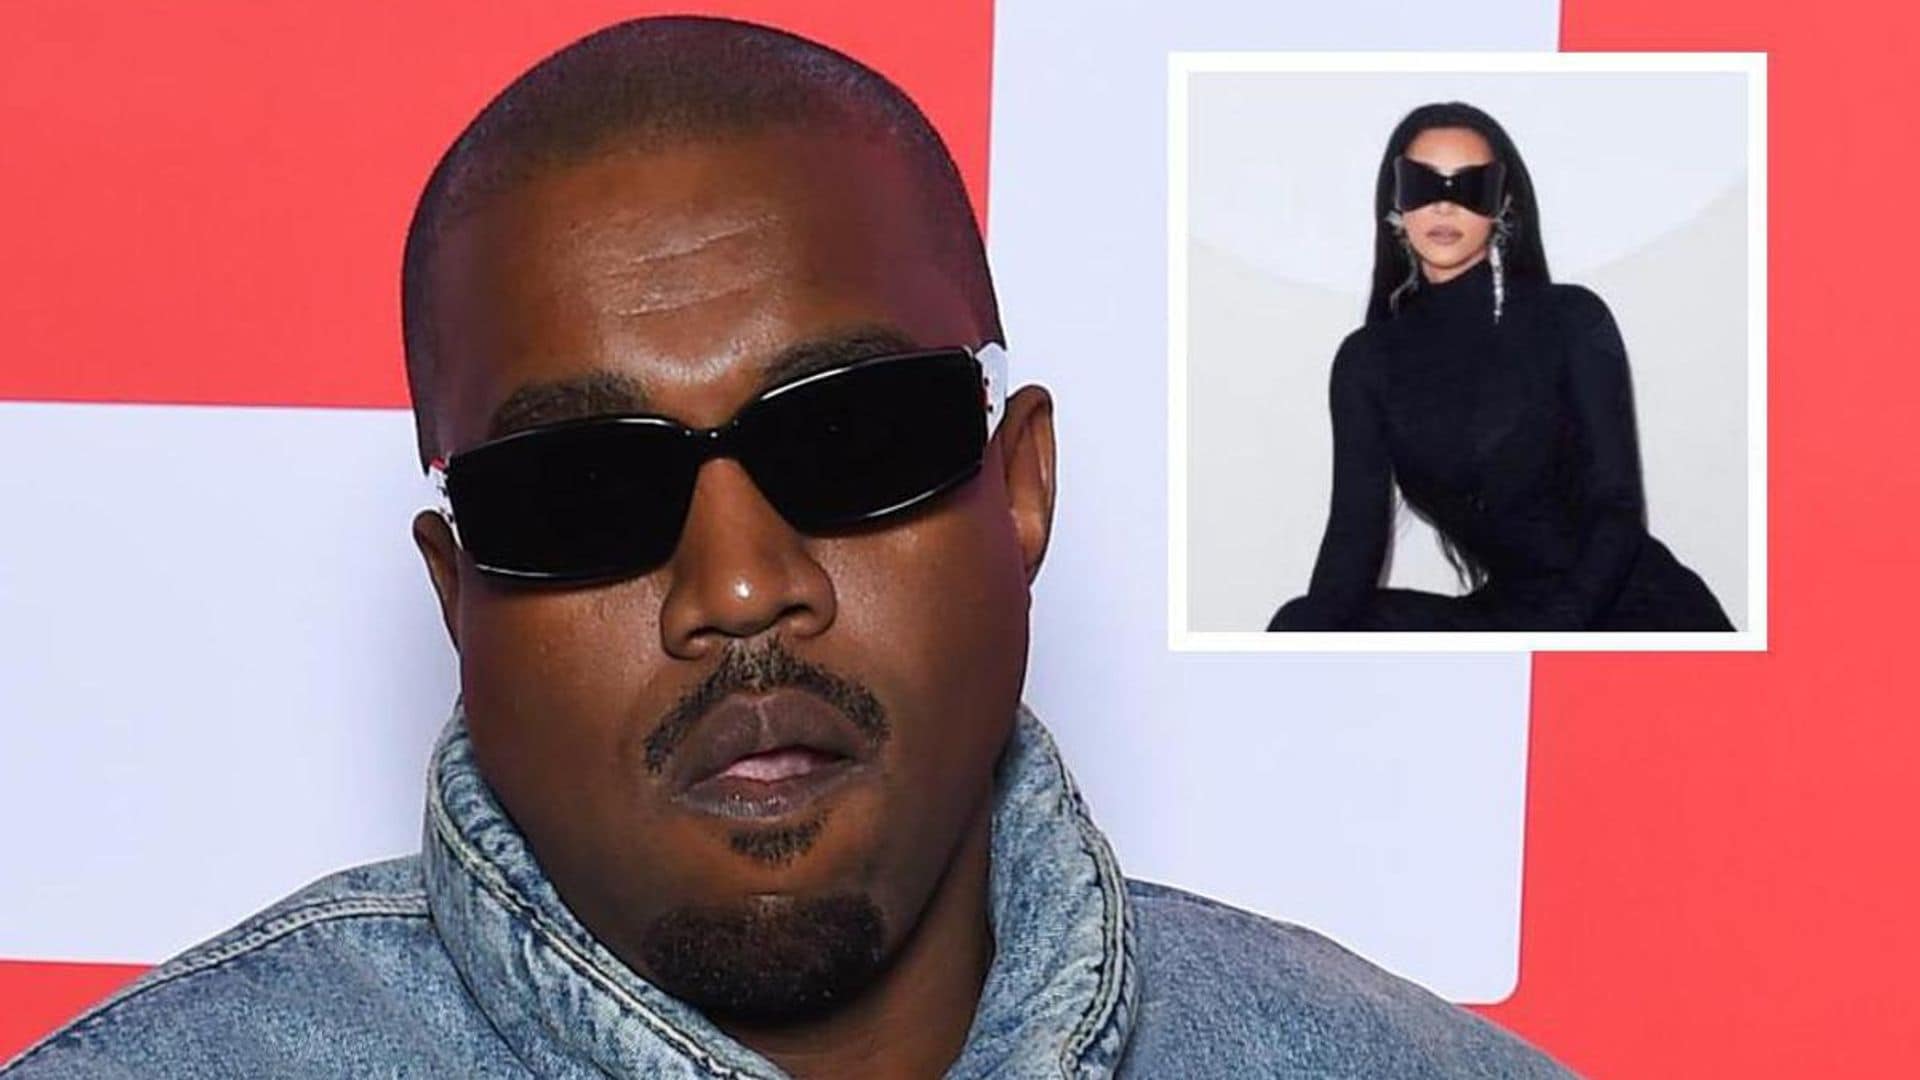 Kanye West shares a picture of Kim Kardashian after taking accountability for jarring posts